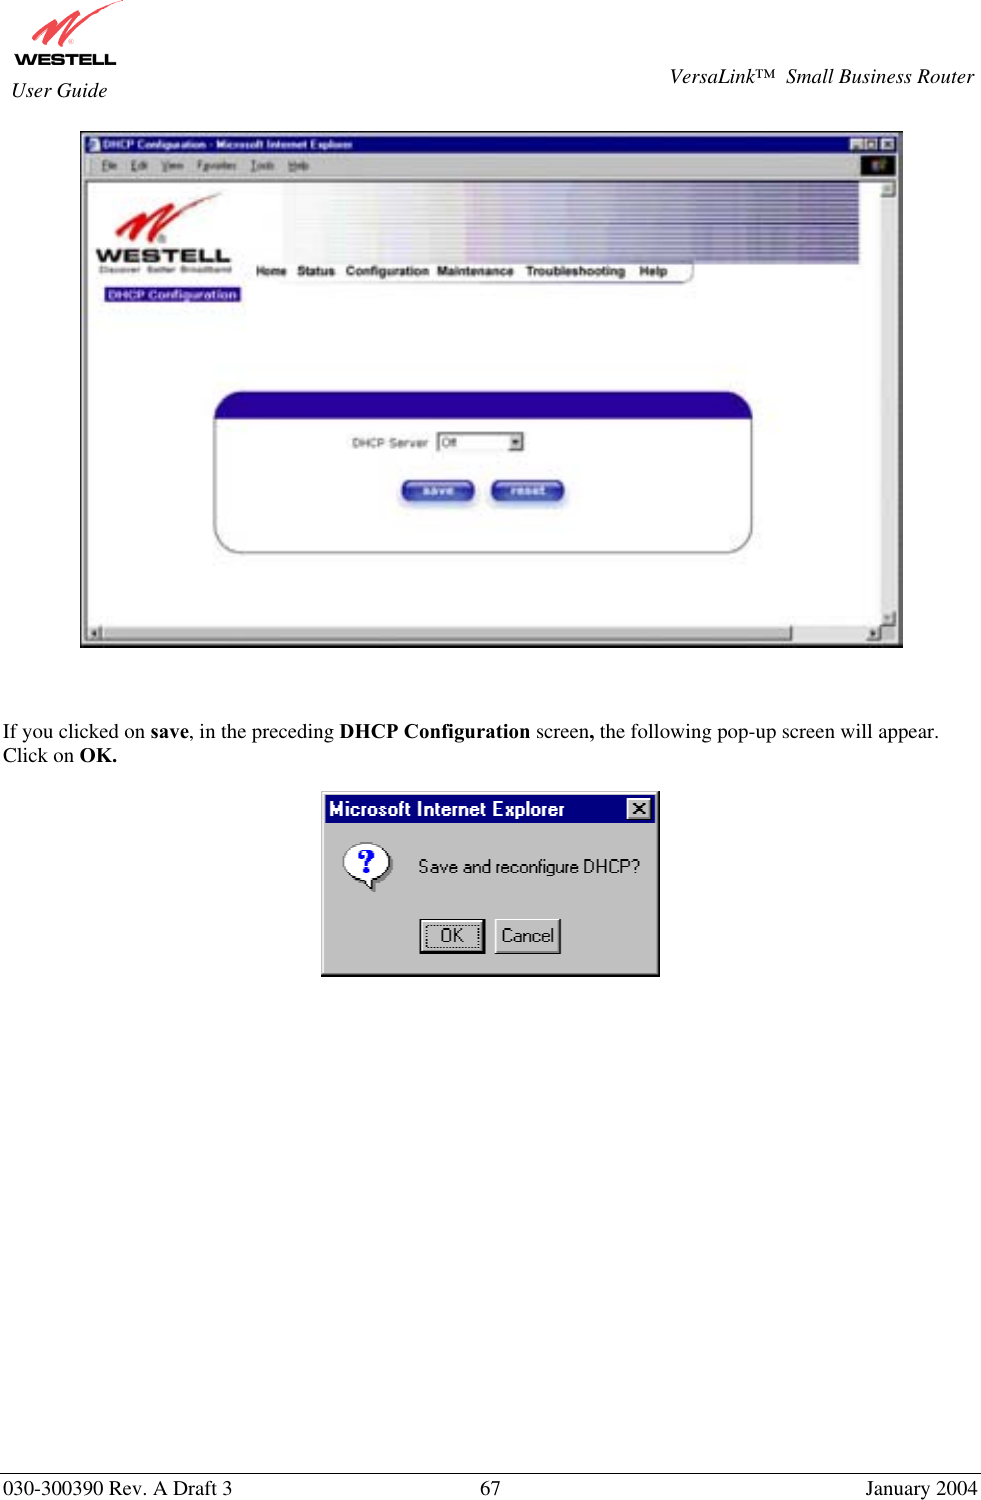       030-300390 Rev. A Draft 3  67  January 2004  VersaLink™  Small Business Router  User Guide     If you clicked on save, in the preceding DHCP Configuration screen, the following pop-up screen will appear. Click on OK.                       